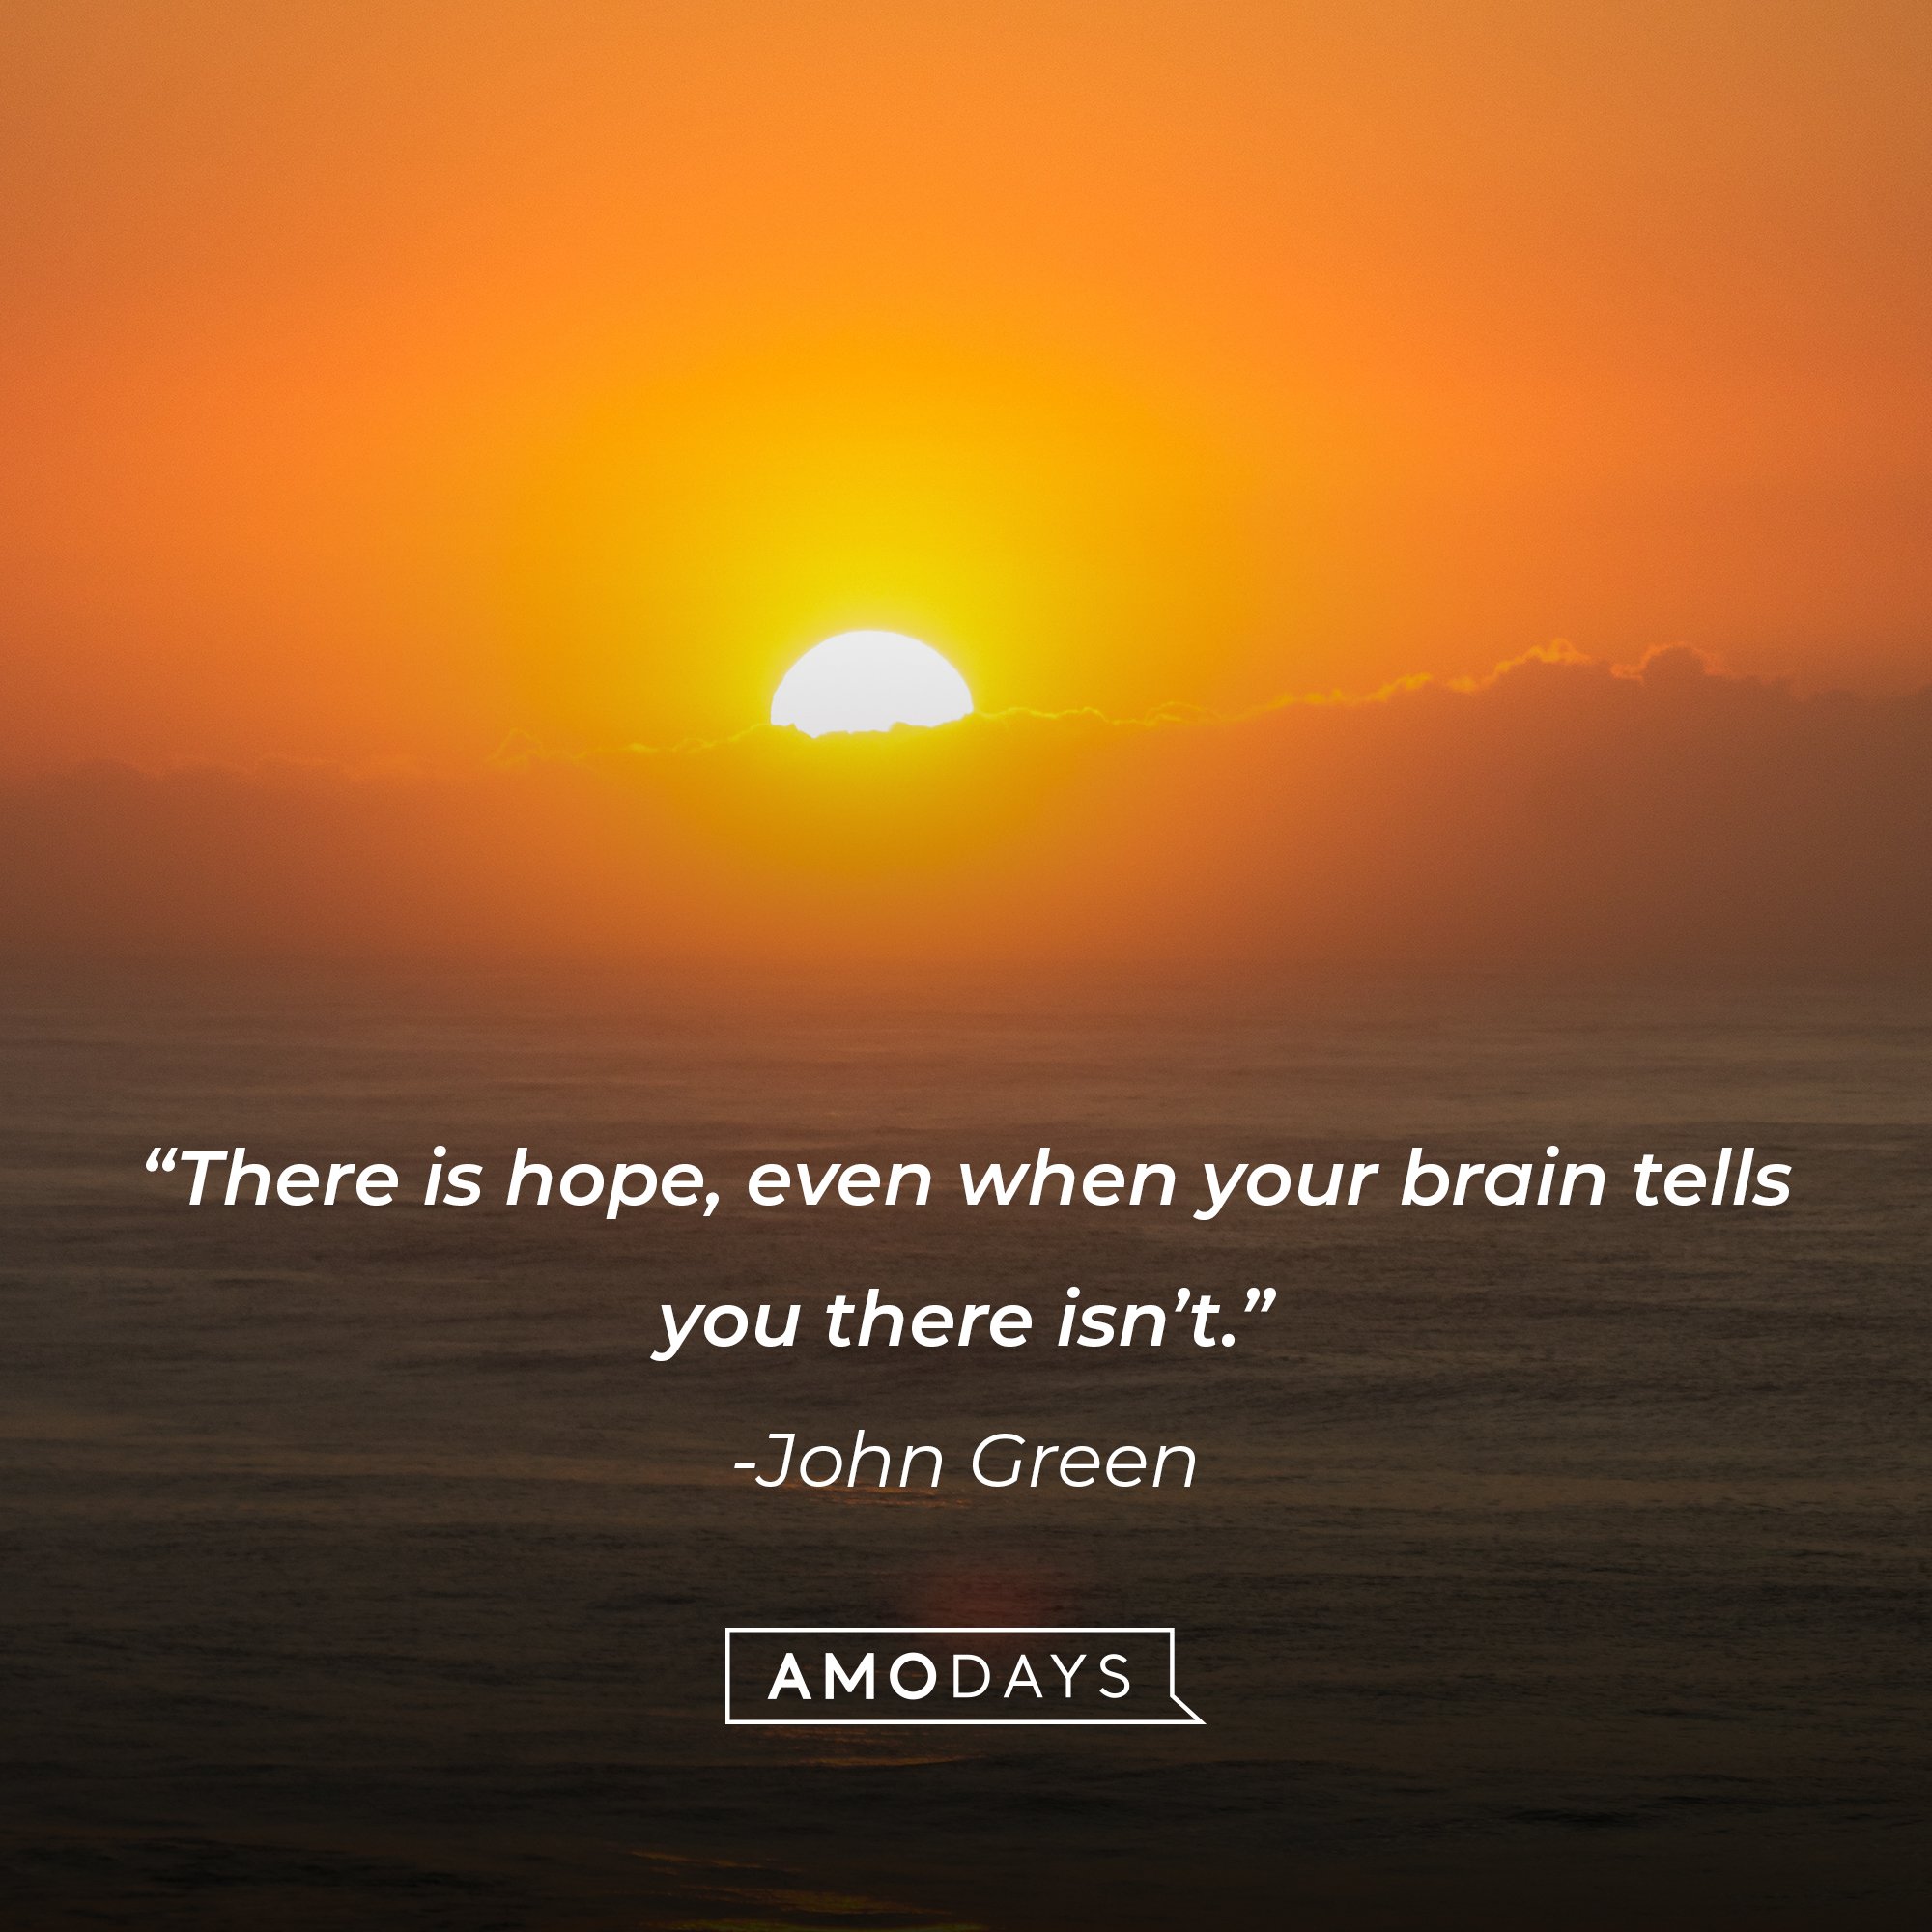  John Green's quote: “There is hope, even when your brain tells you there isn’t.” | Image: AmoDays